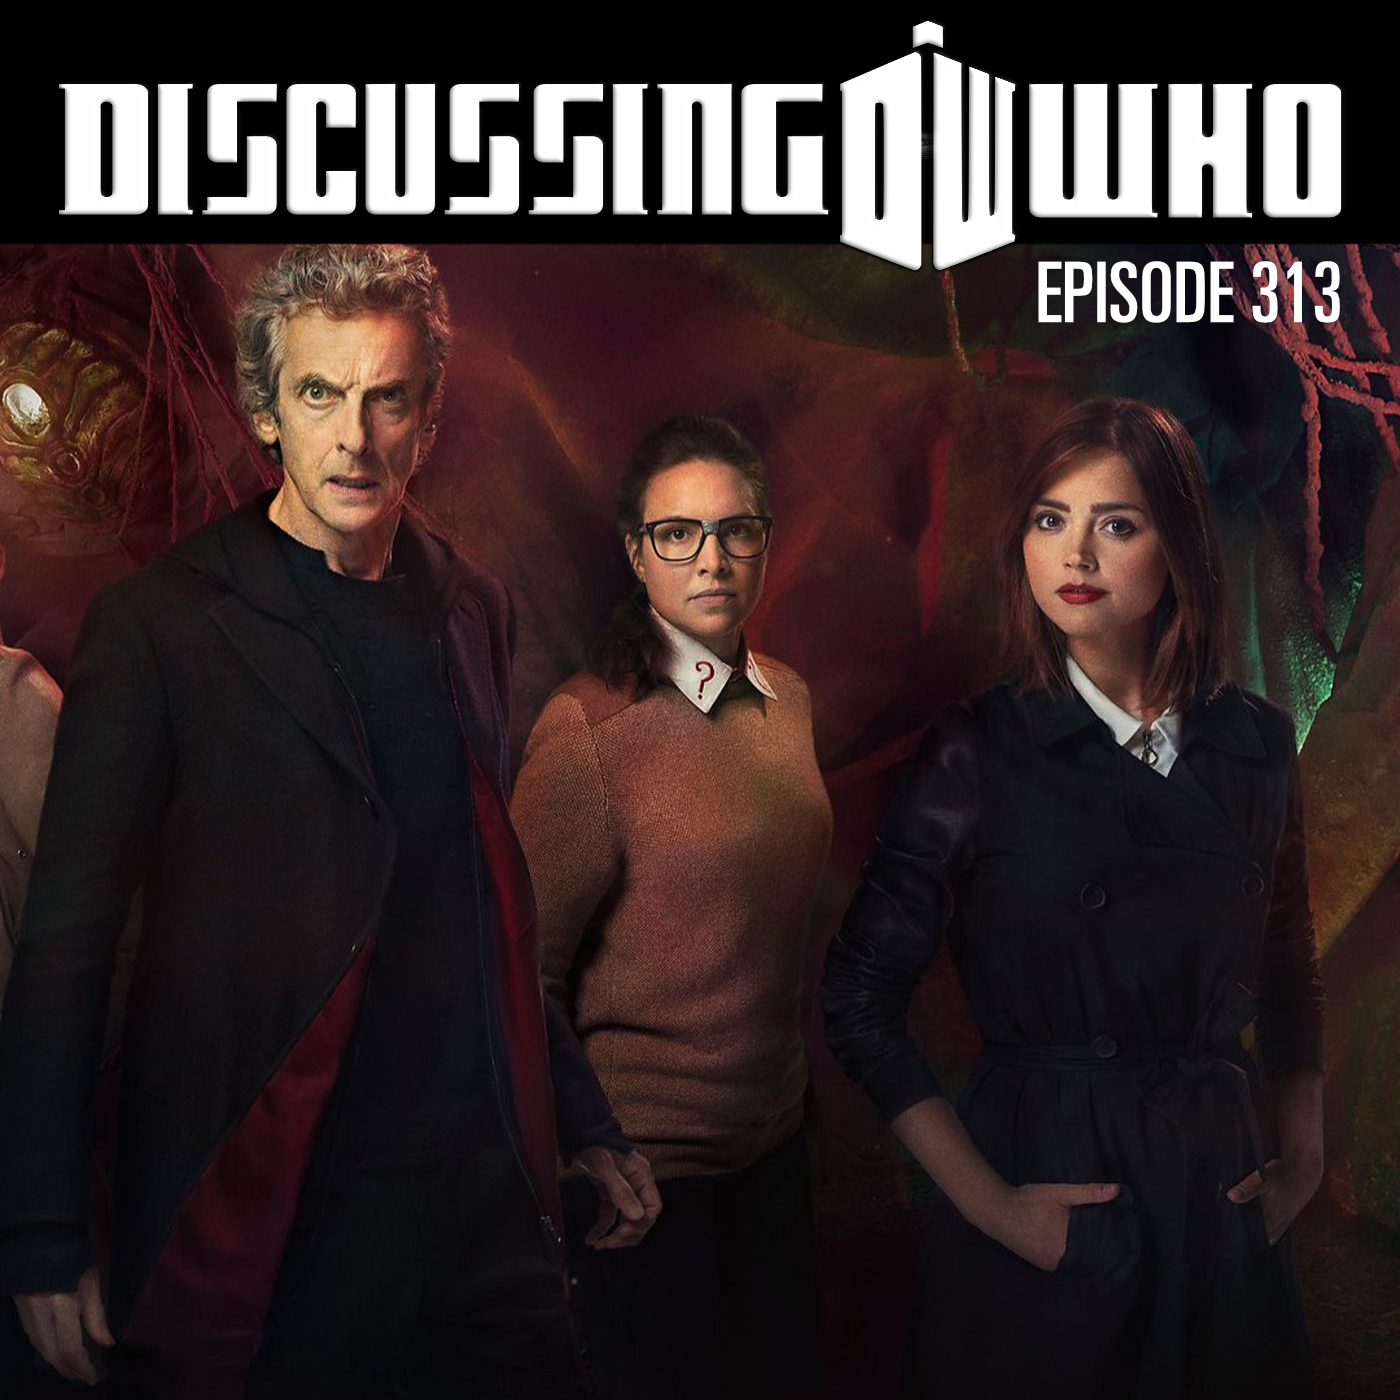 Episode 313: Review of The Zygon Inversion, Doctor Who Series 9 Episode 8